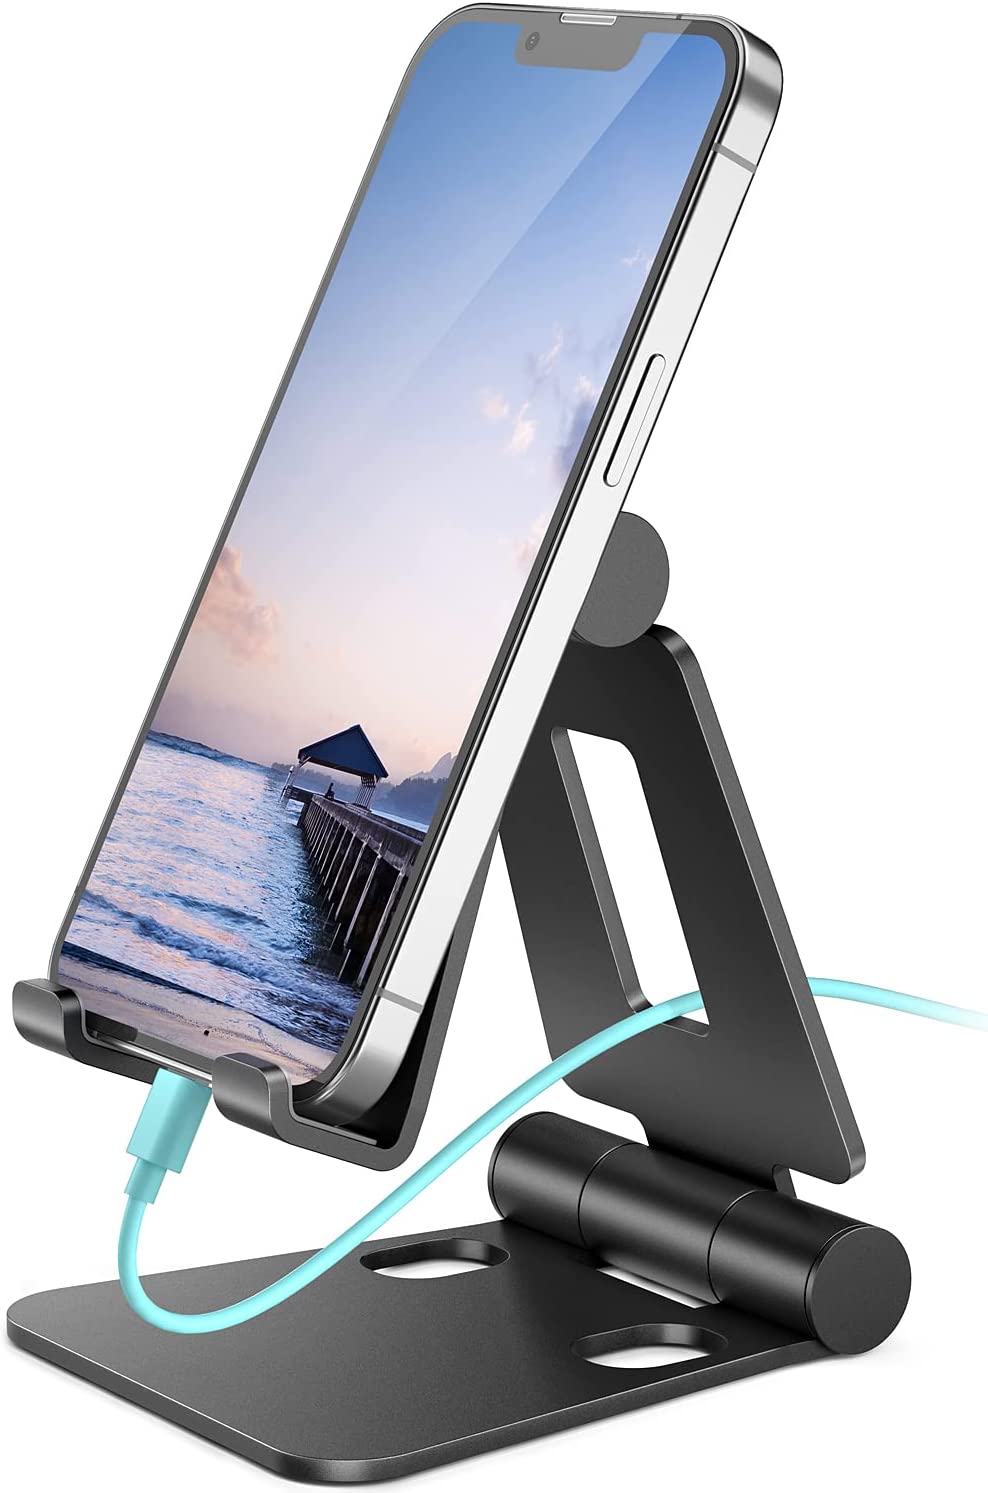 Nulaxy A4 Portable Ergonomic Viewing Cellphone Holder